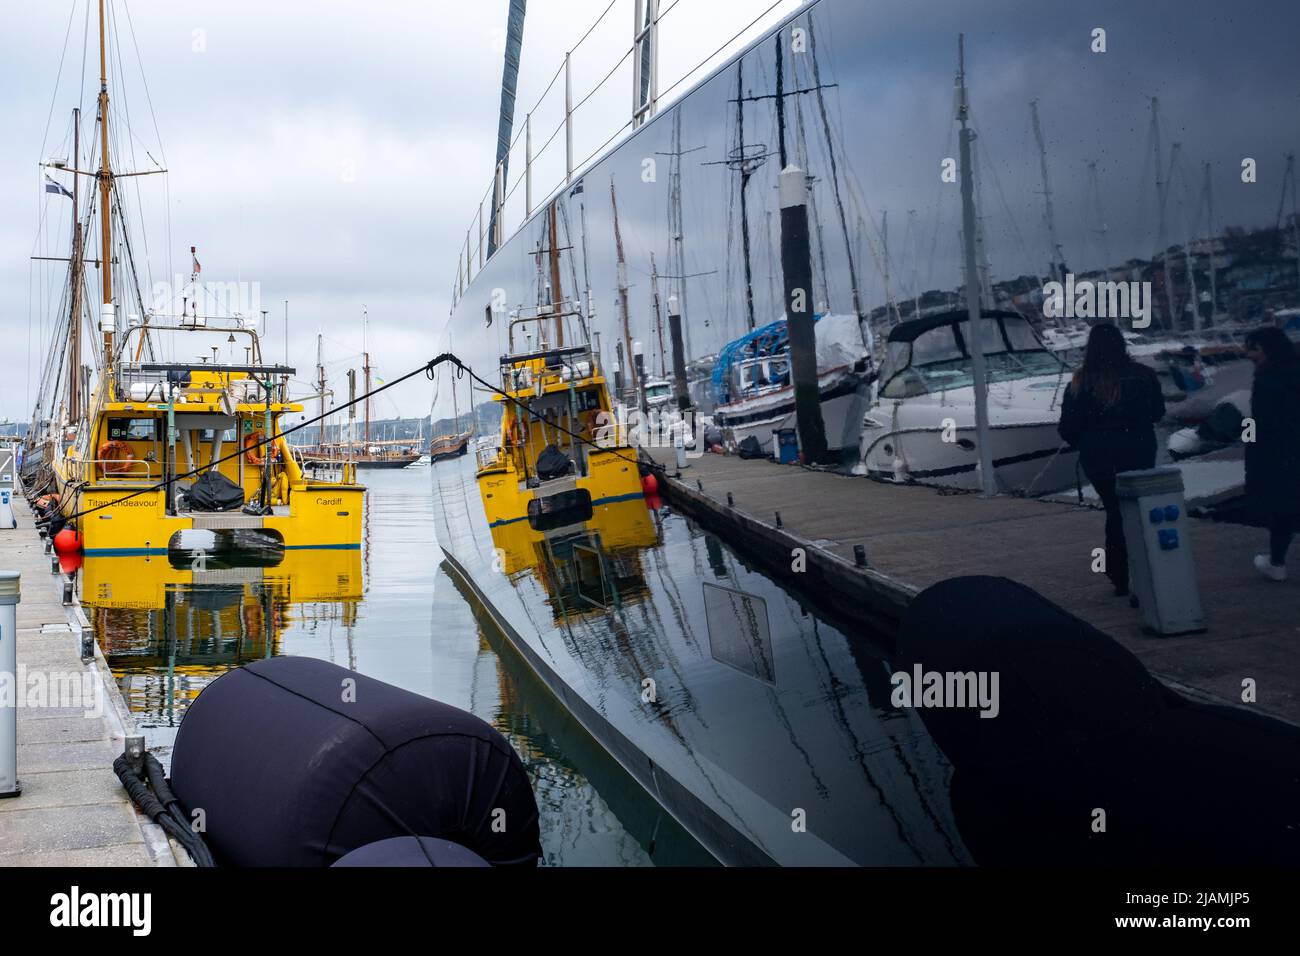 Reflections of working boats and marina, in the incredibly polished hull of a multi million pound super yacht moored in Falmouth. Mirror of the world Stock Photo